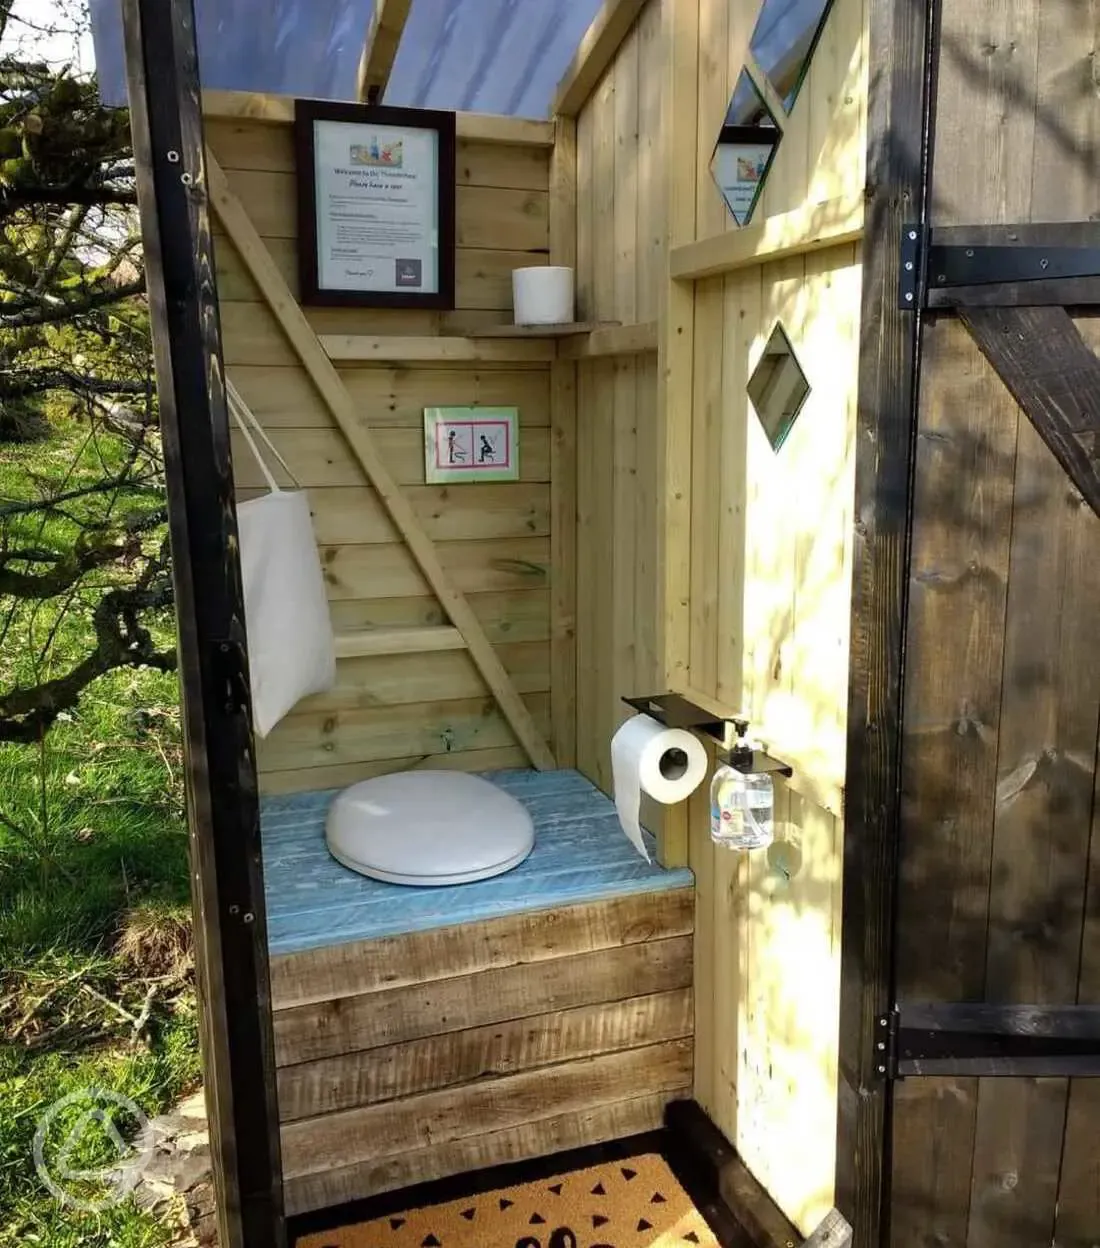 One of 2 composting loos on site, cleaned daily 